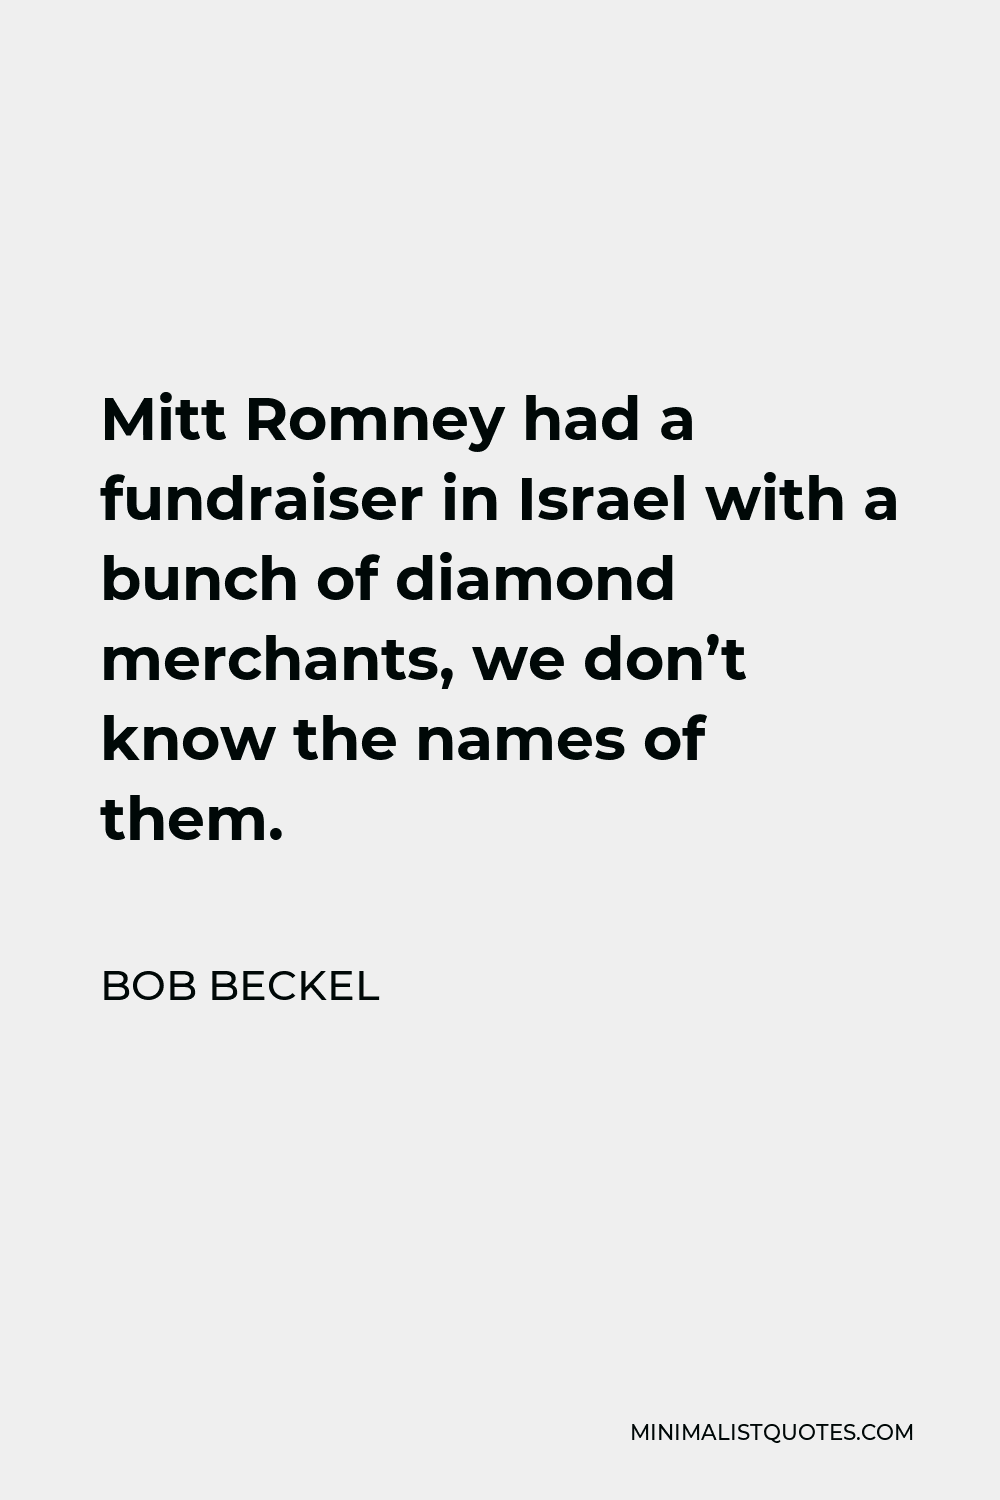 Bob Beckel Quote - Mitt Romney had a fundraiser in Israel with a bunch of diamond merchants, we don’t know the names of them.